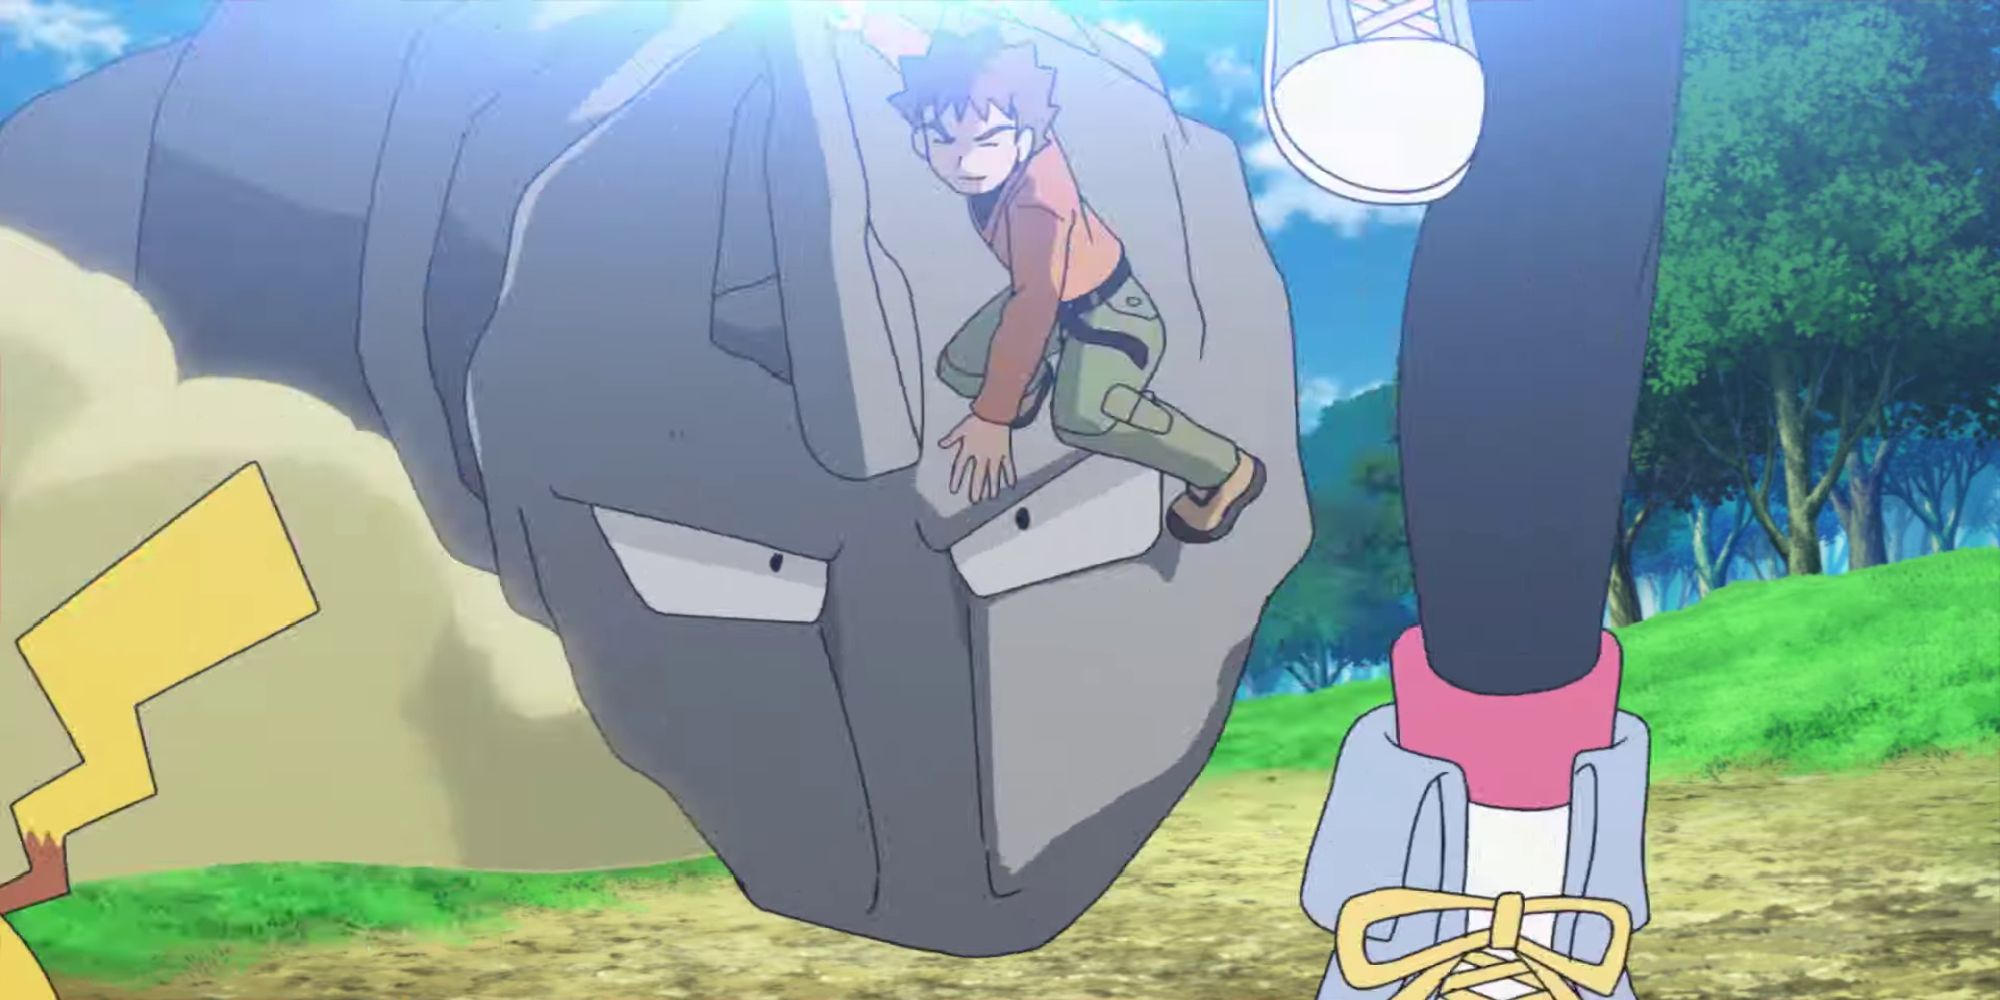 Trainer Brock riding Onix behind others in a forest